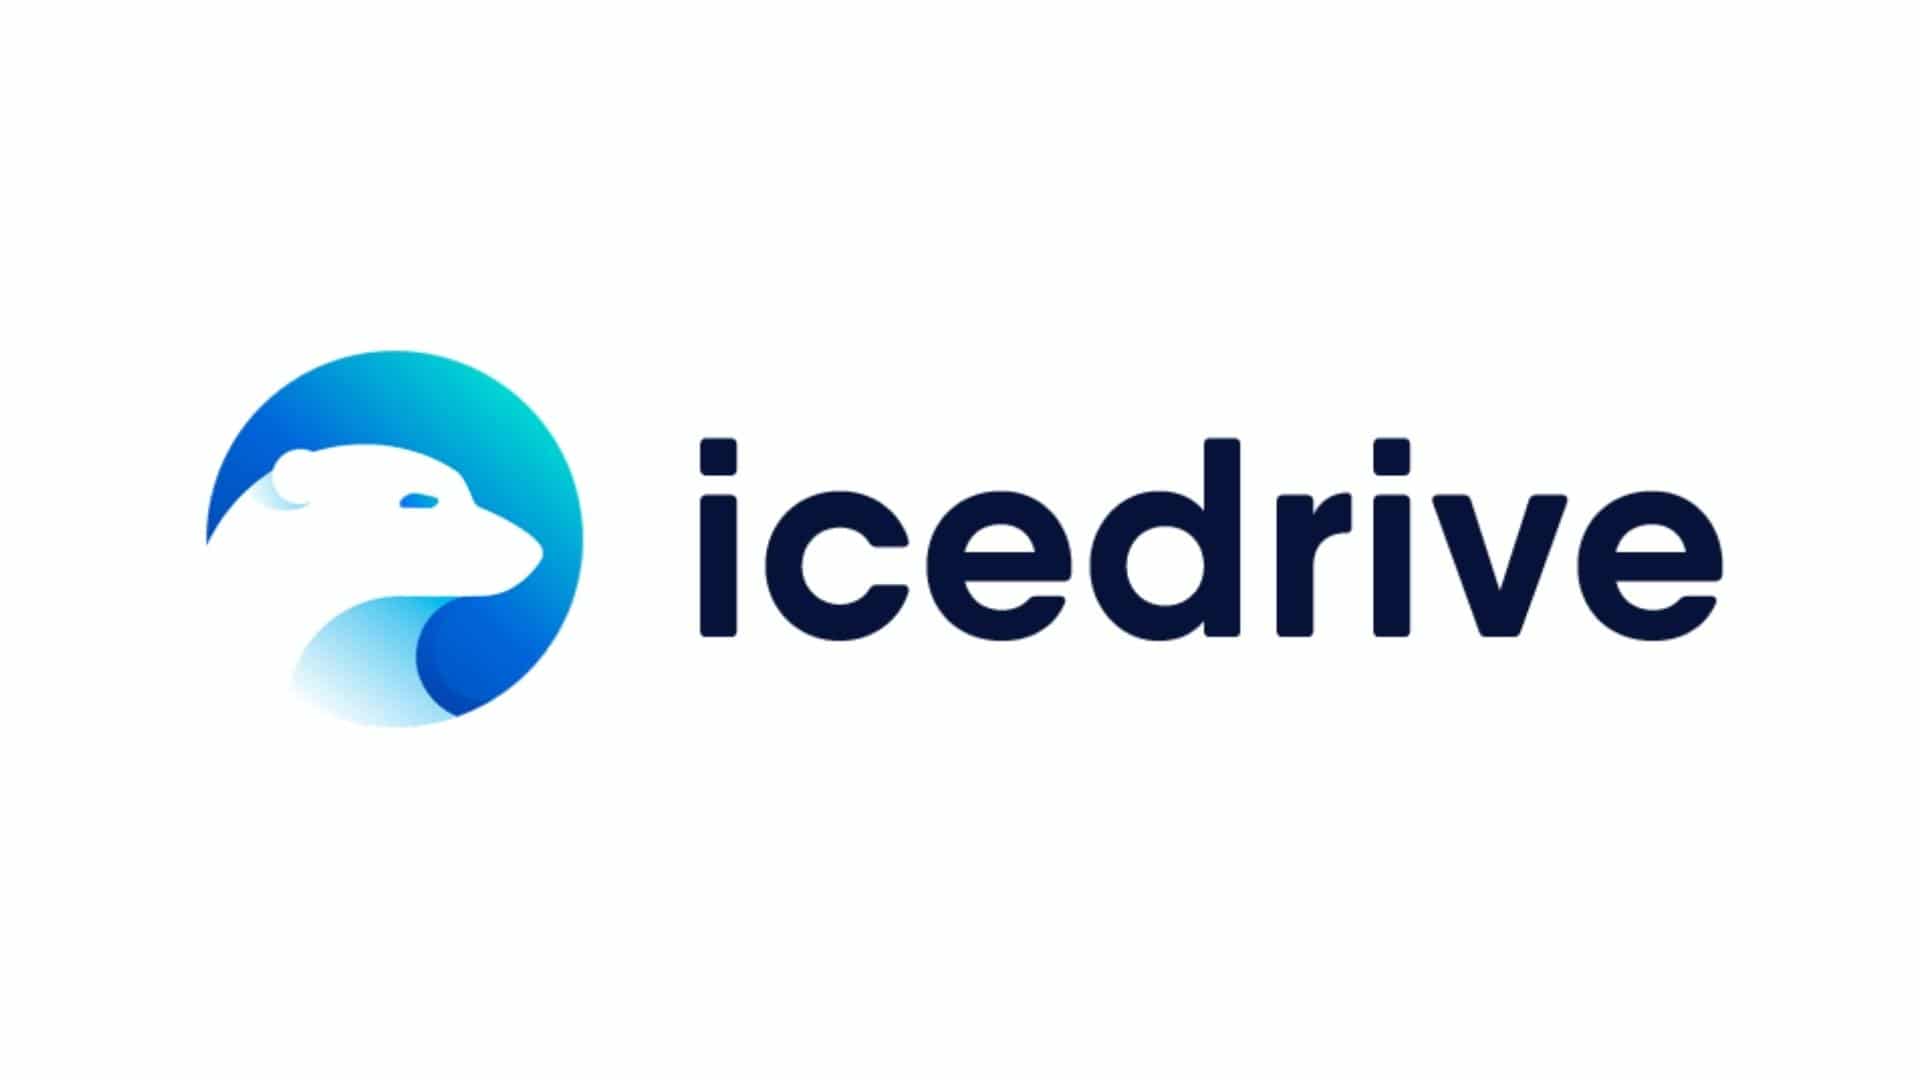 Icedrive Review